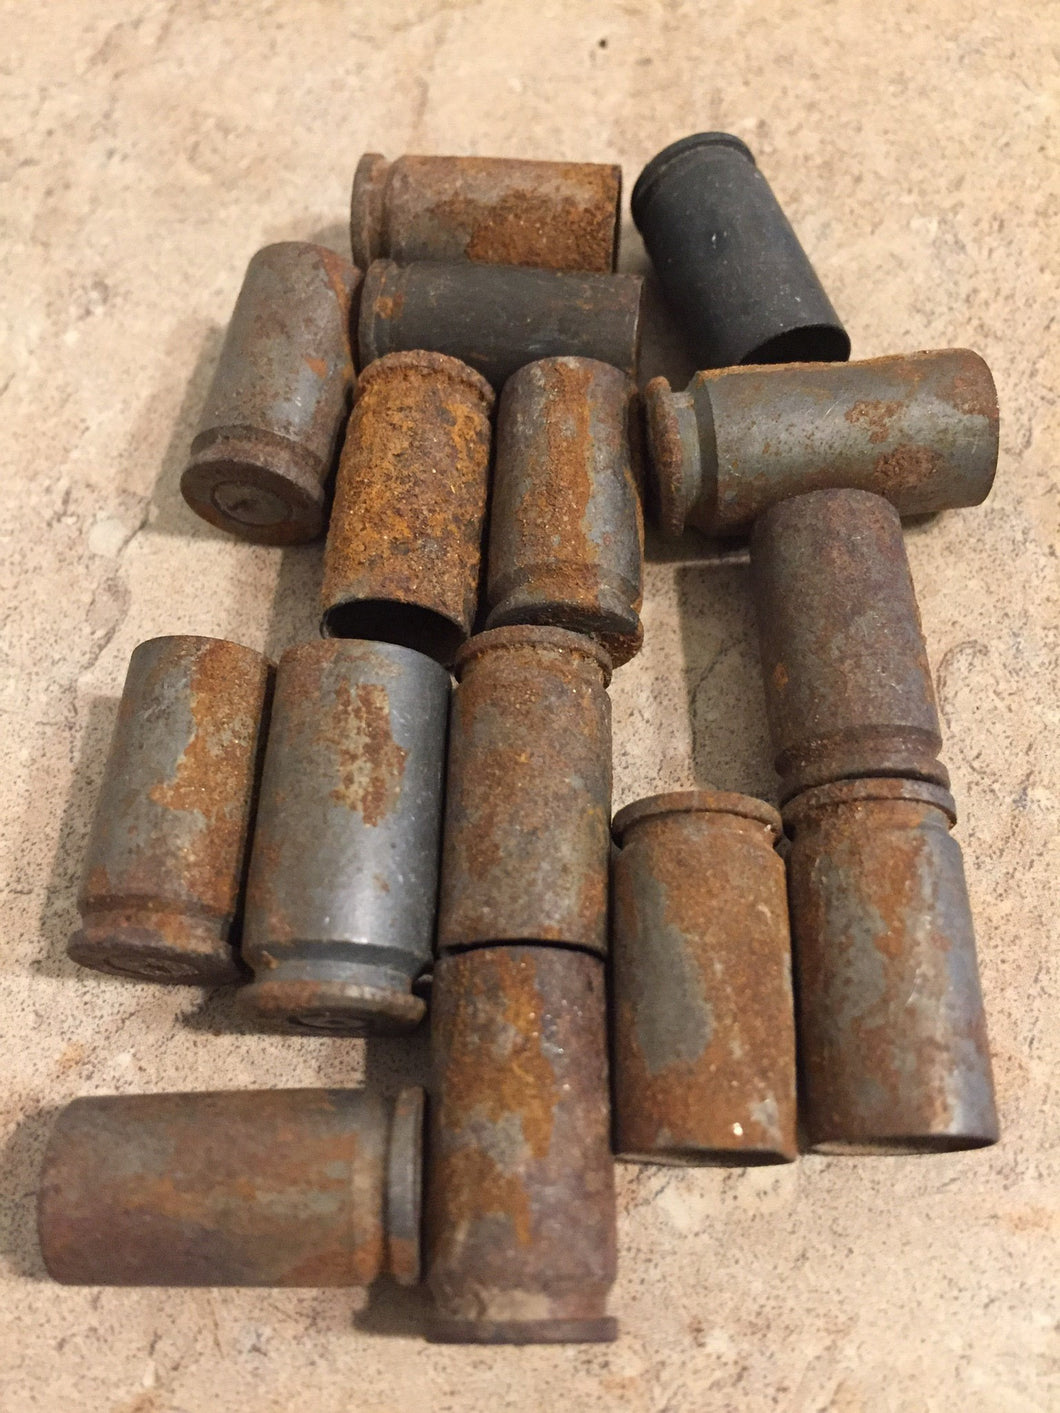 9MM Brass Shells Rusted Empty Used Spent Casings Once Fired Reloading 9X19 Pistol DIY Bullet Jewelry Steampunk Ammo Crafts Qty 15 Pcs